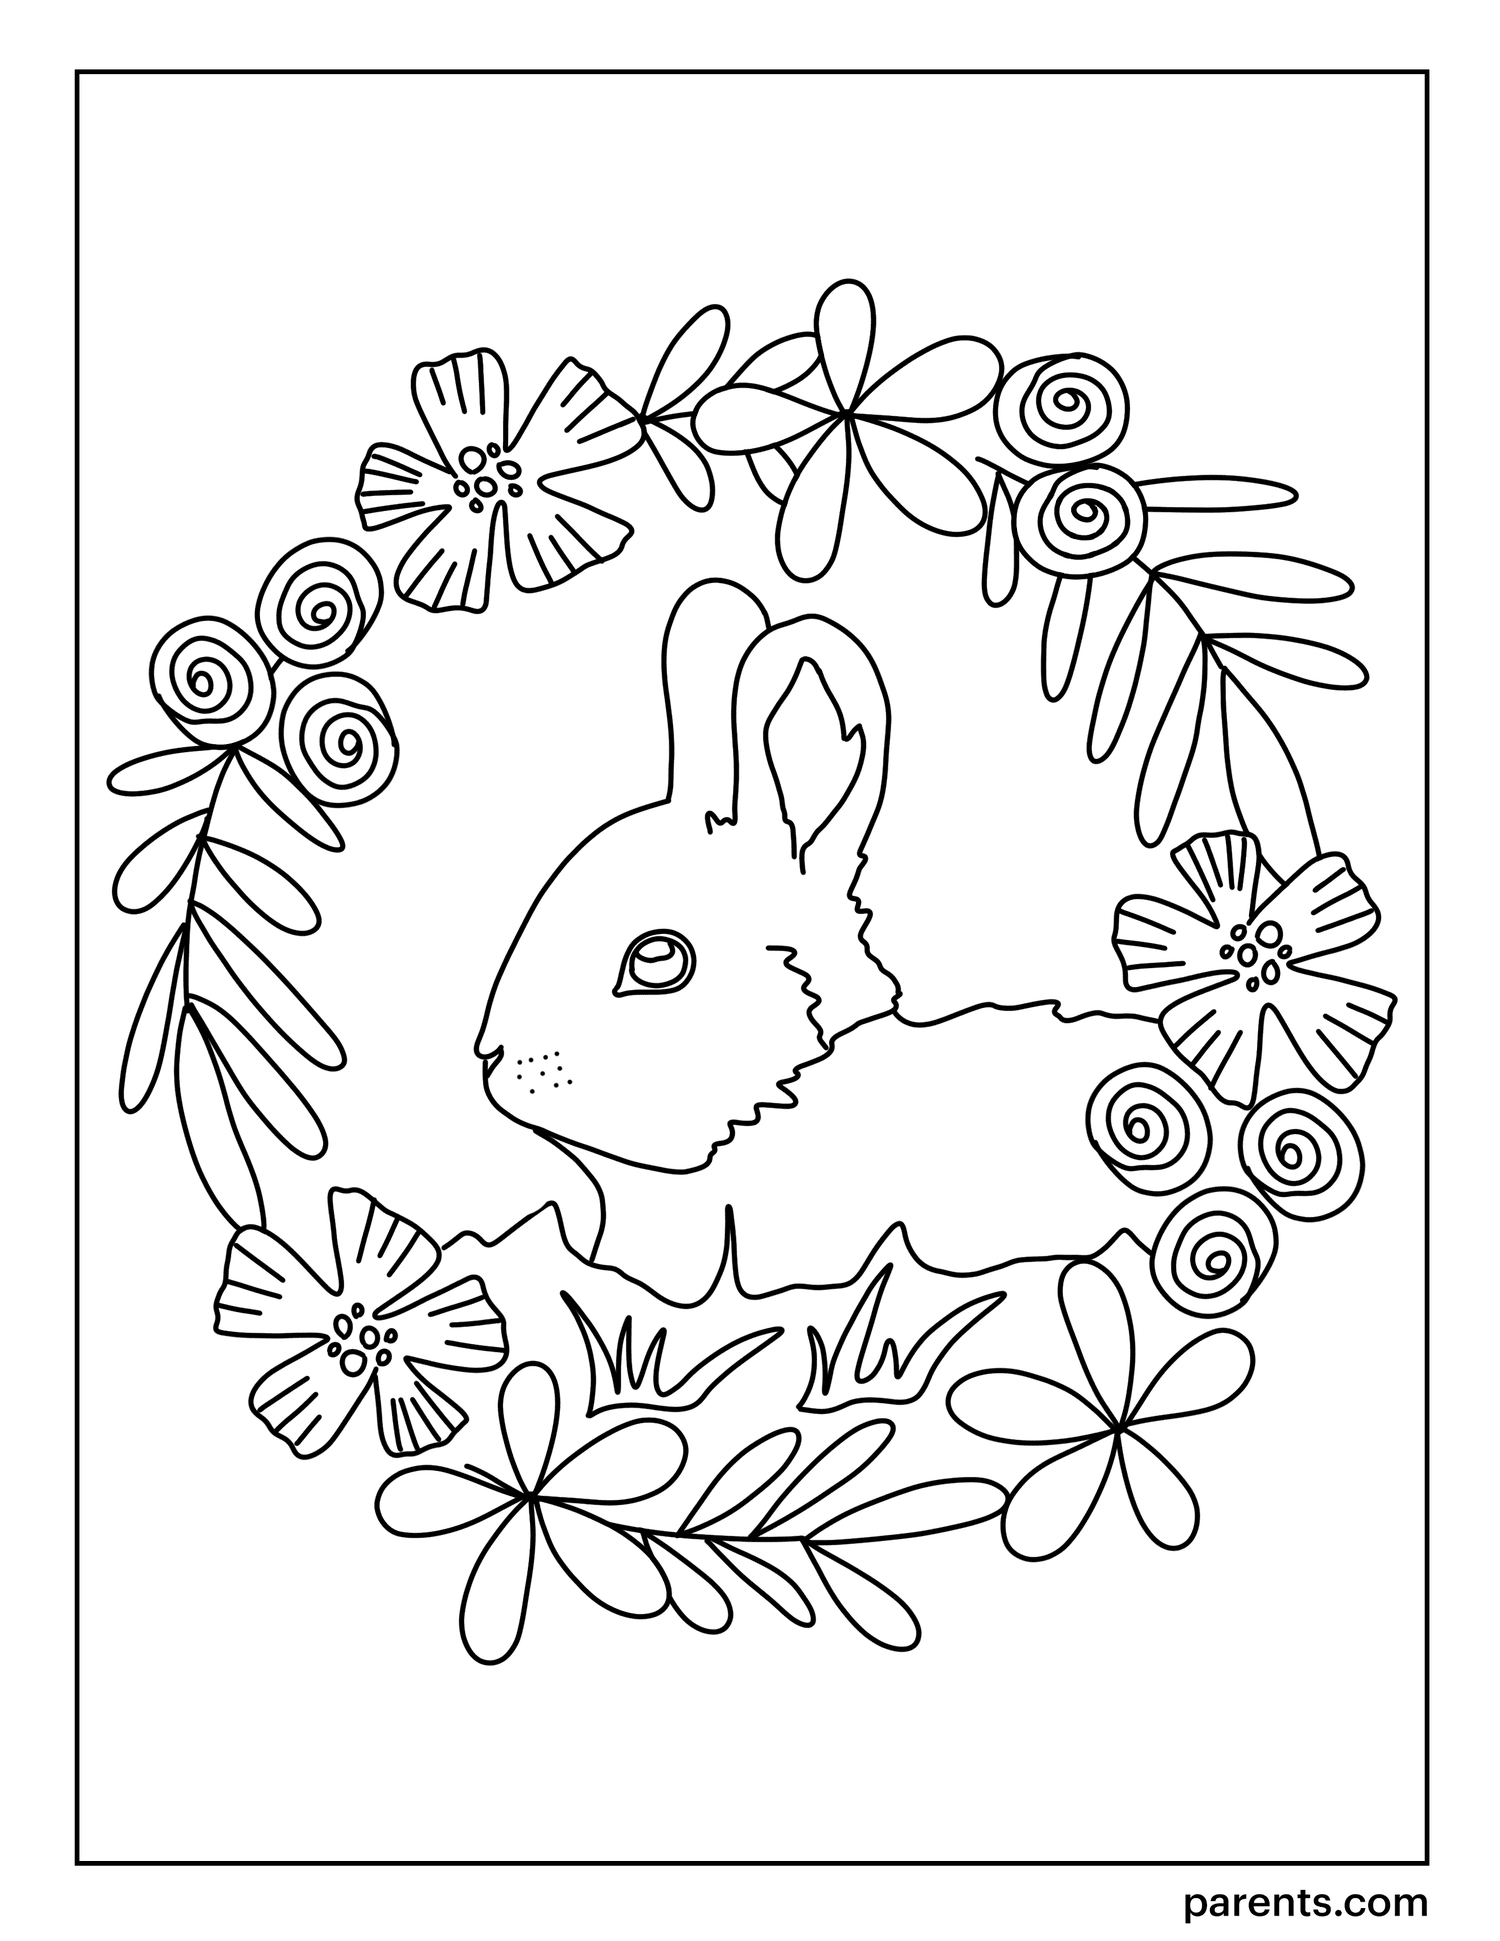 10 Free Easter Coloring Pages For Kids Parents